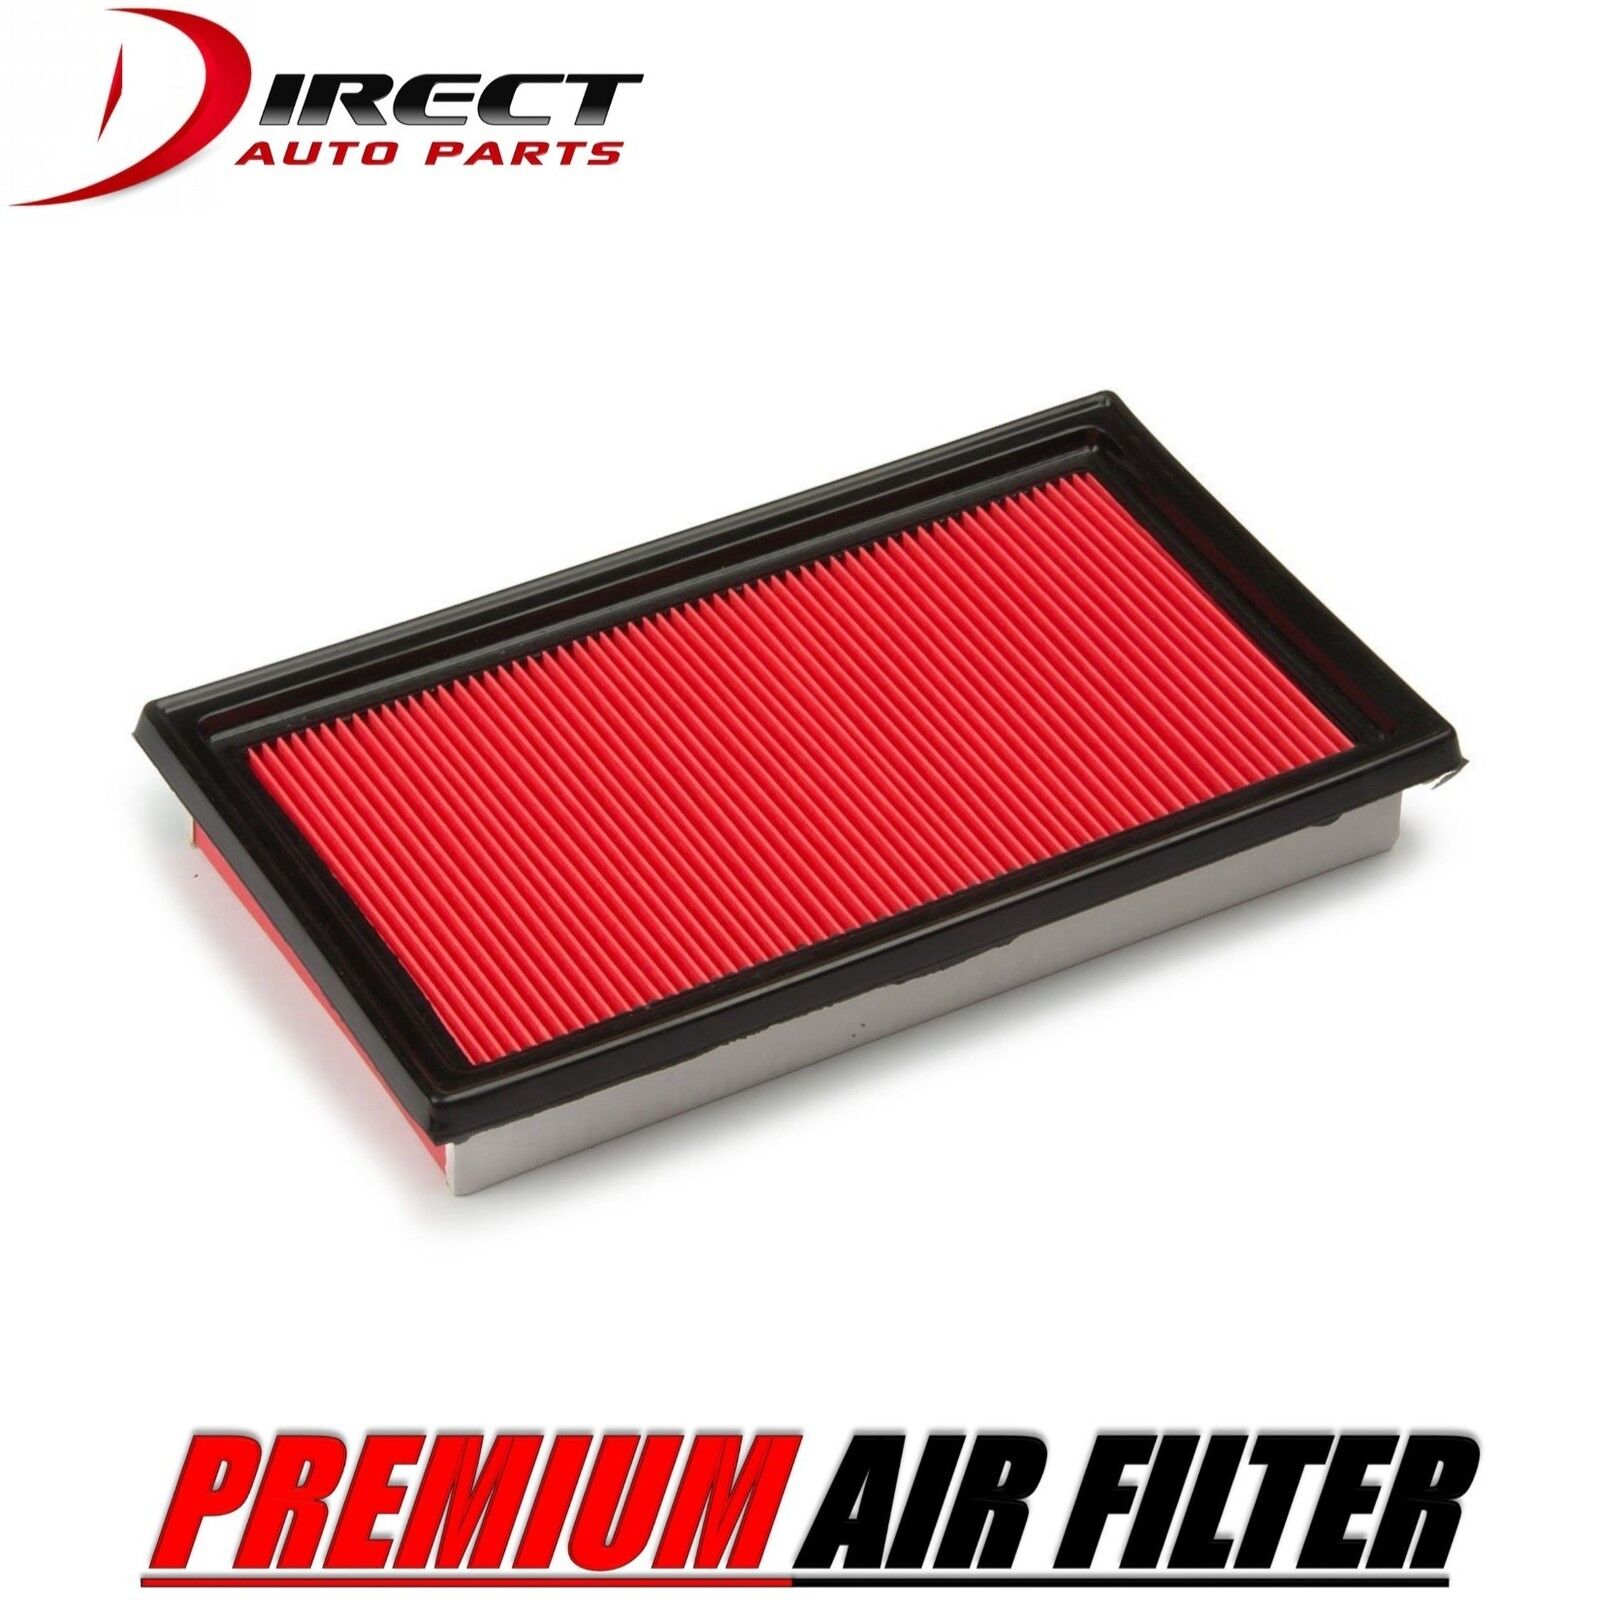 AIR FILTER FOR NISSAN FITS 200SX 2.0L ENGINE 1995 - 1998